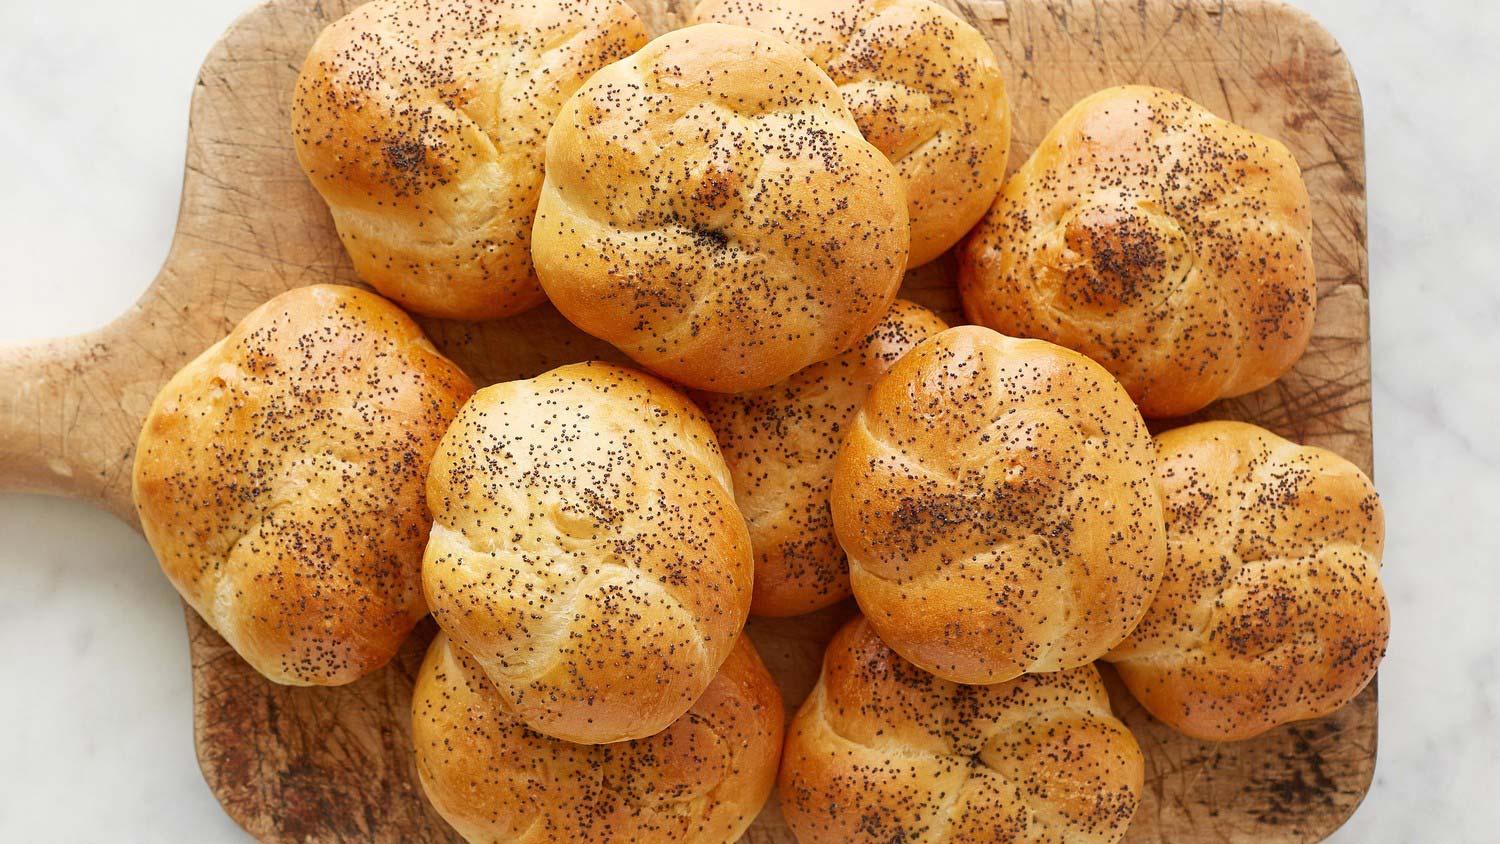 🍰 Only a Baked Good Connoisseur Will Have Eaten at Least 20/39 of These Foods Kaiser Rolls